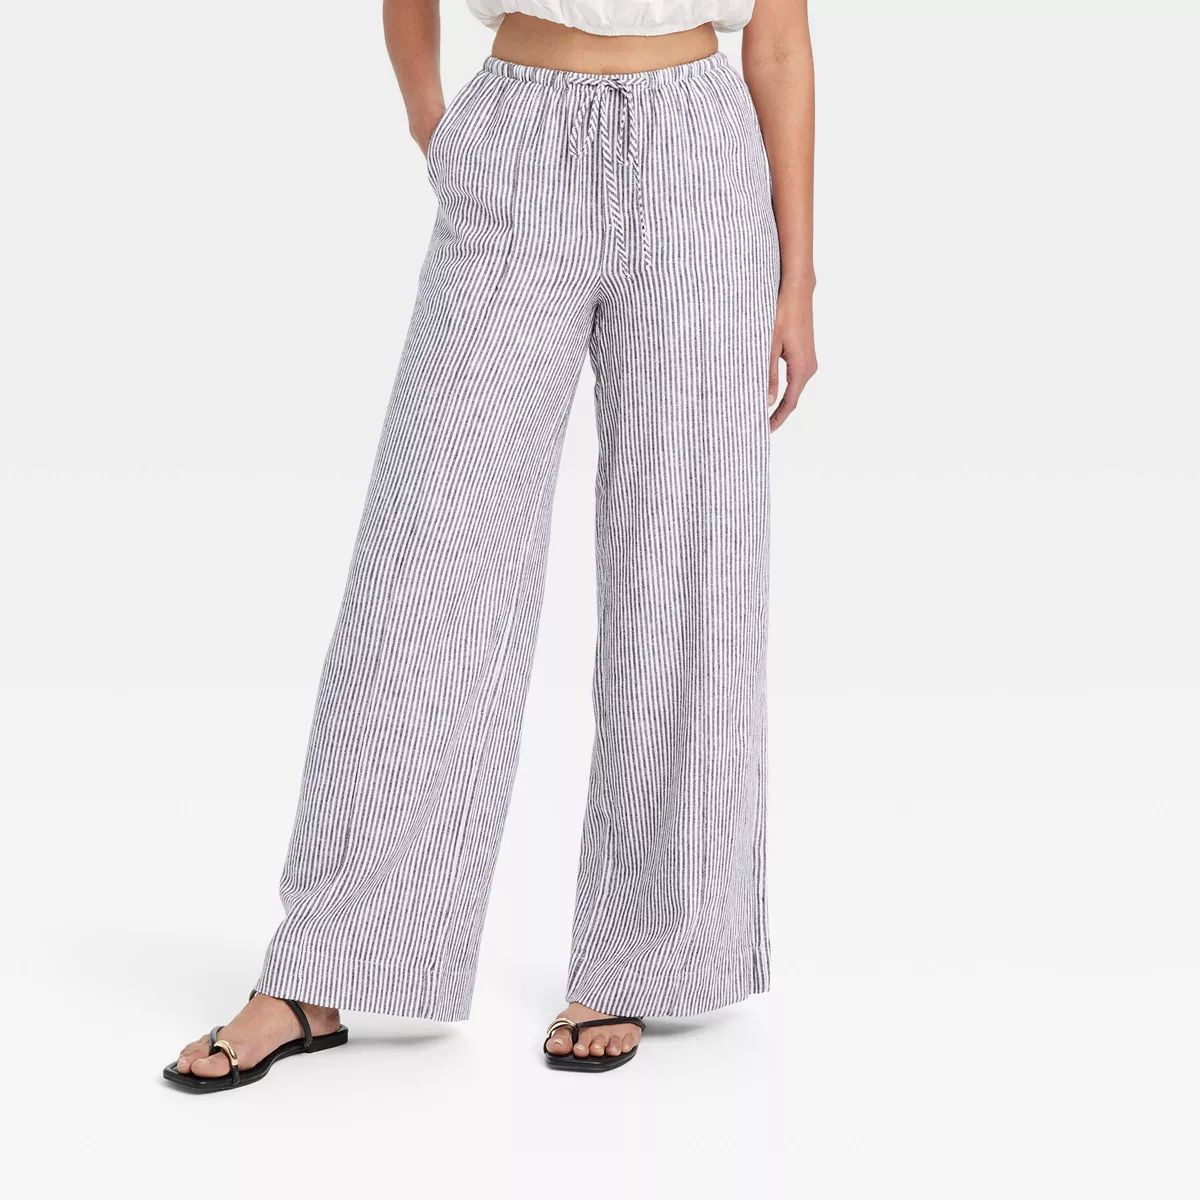 Women's High-Rise Wide Leg Linen Pull-On Pants - A New Day™ White XS | Target